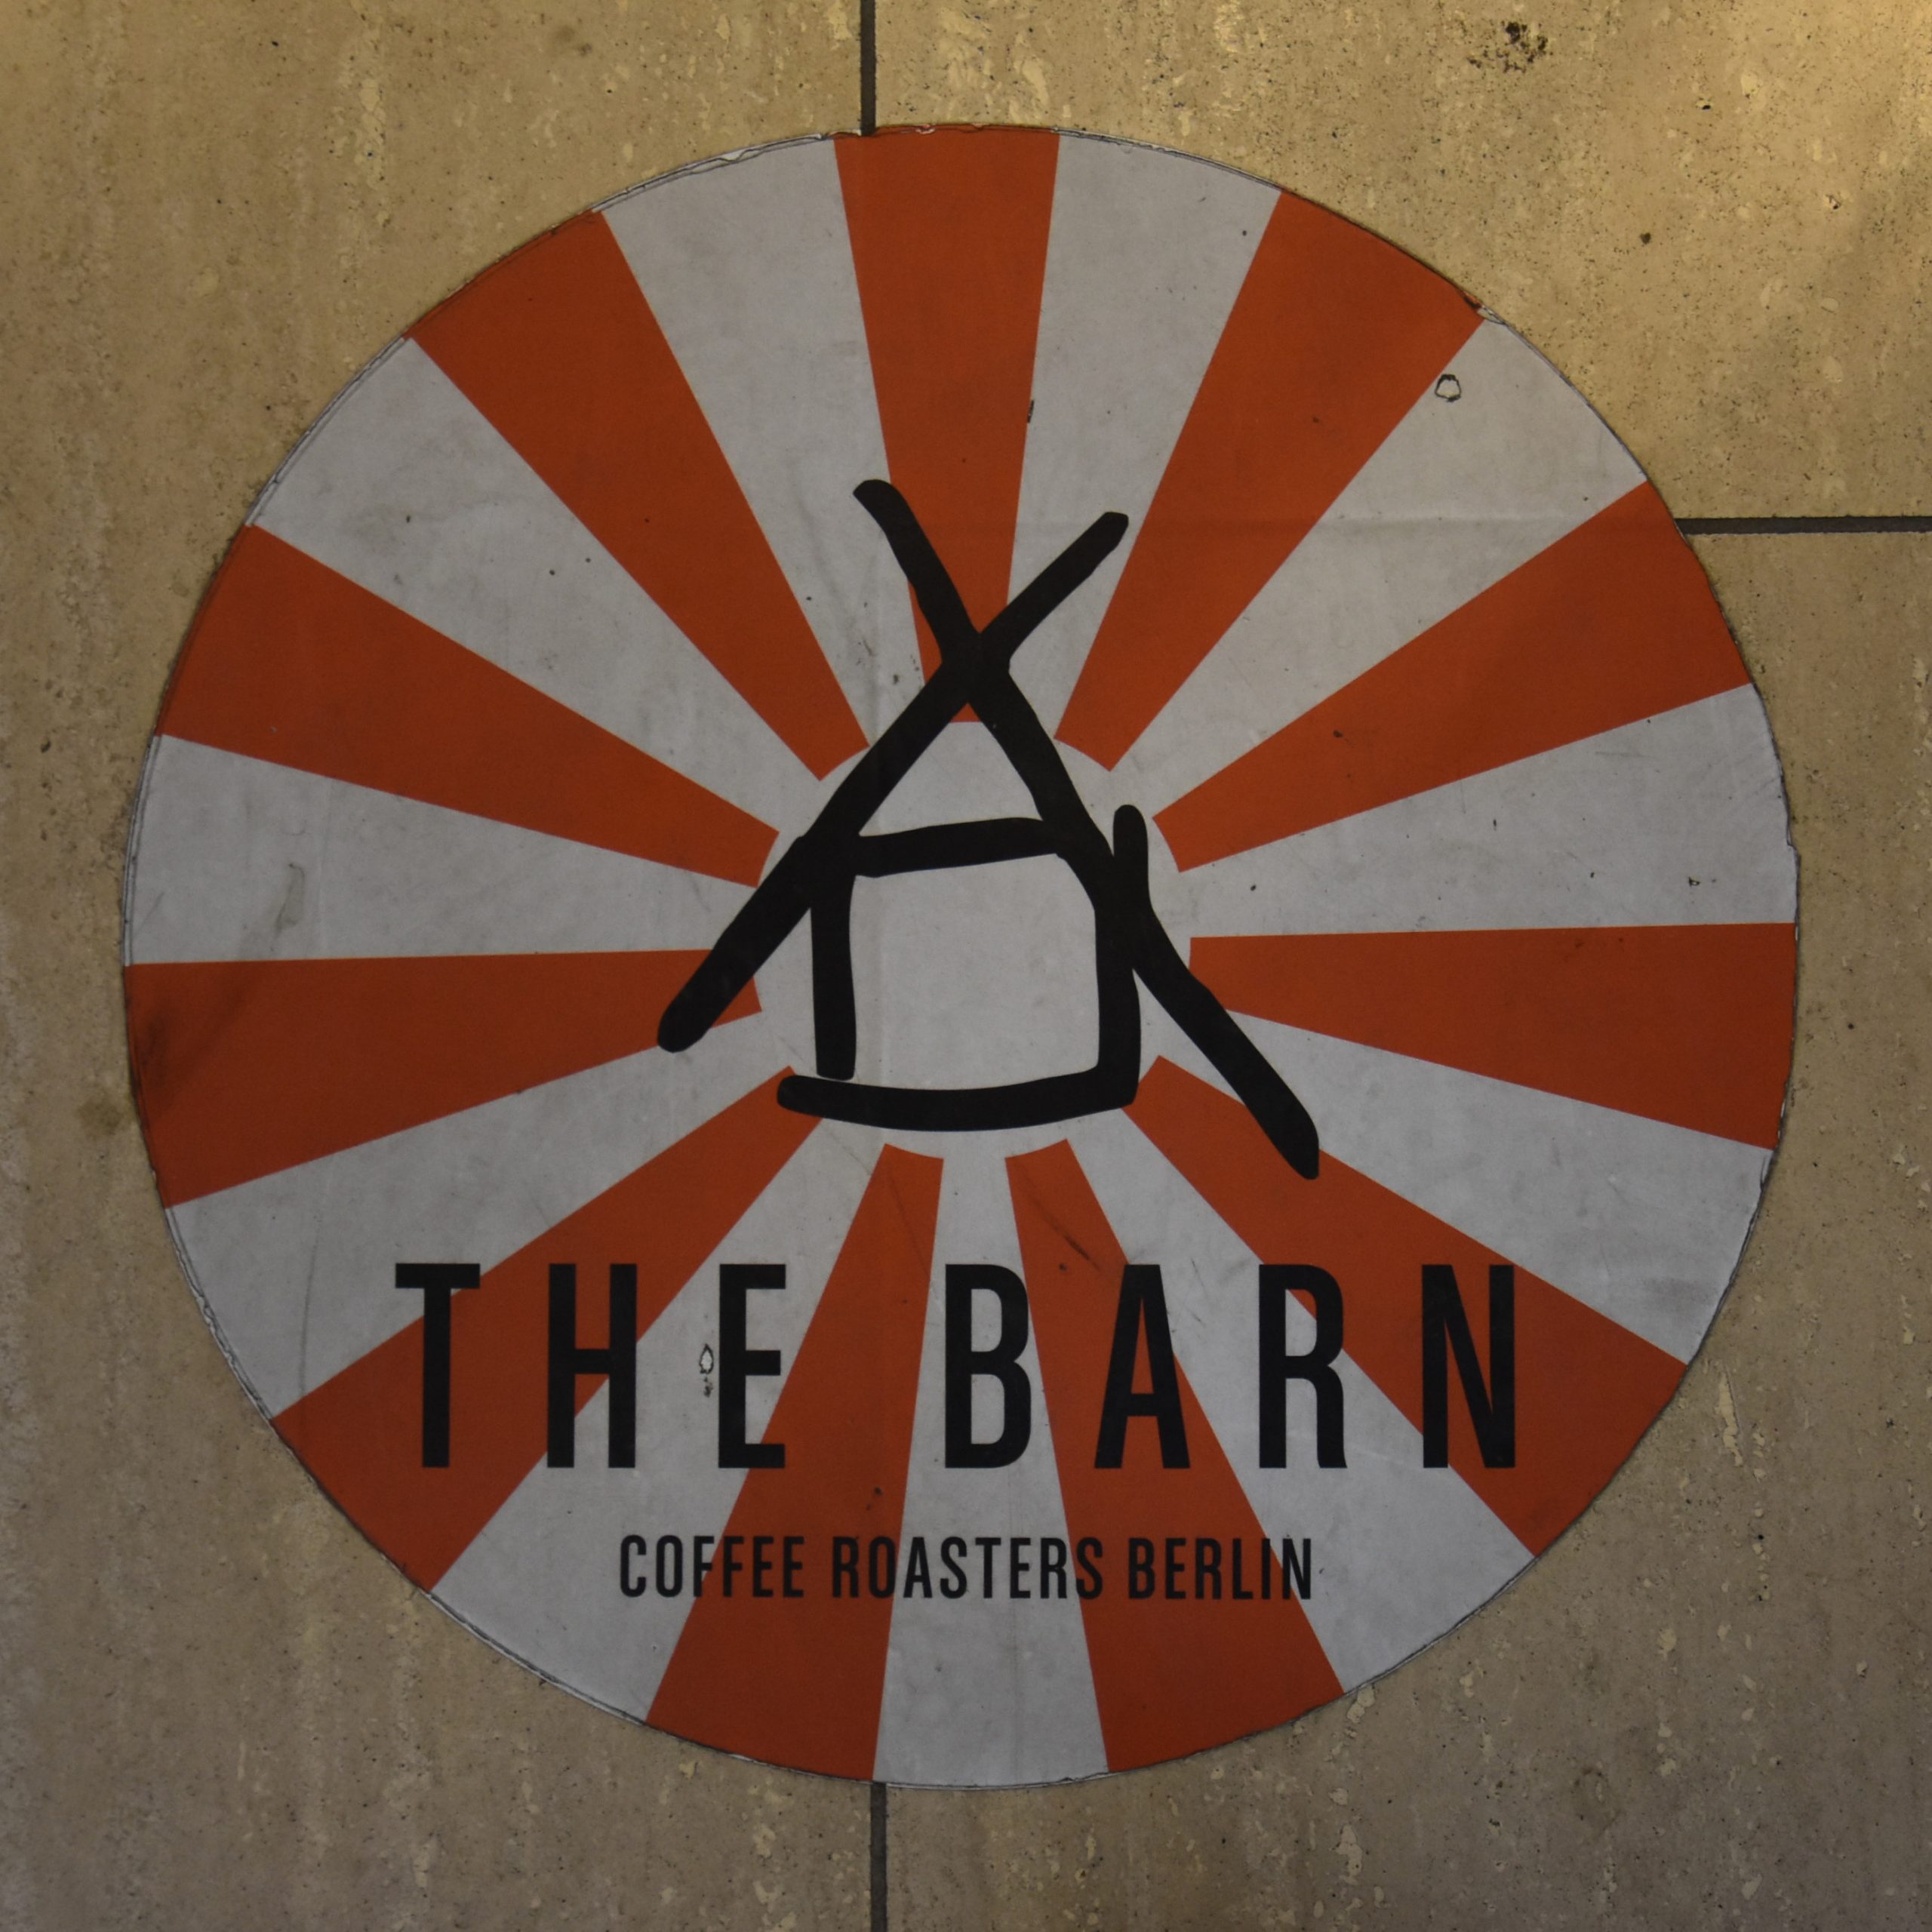 Two rolled into one, the minimalist logo of The Barn overlaid on the red and white stripped awning of Café Kanzler.